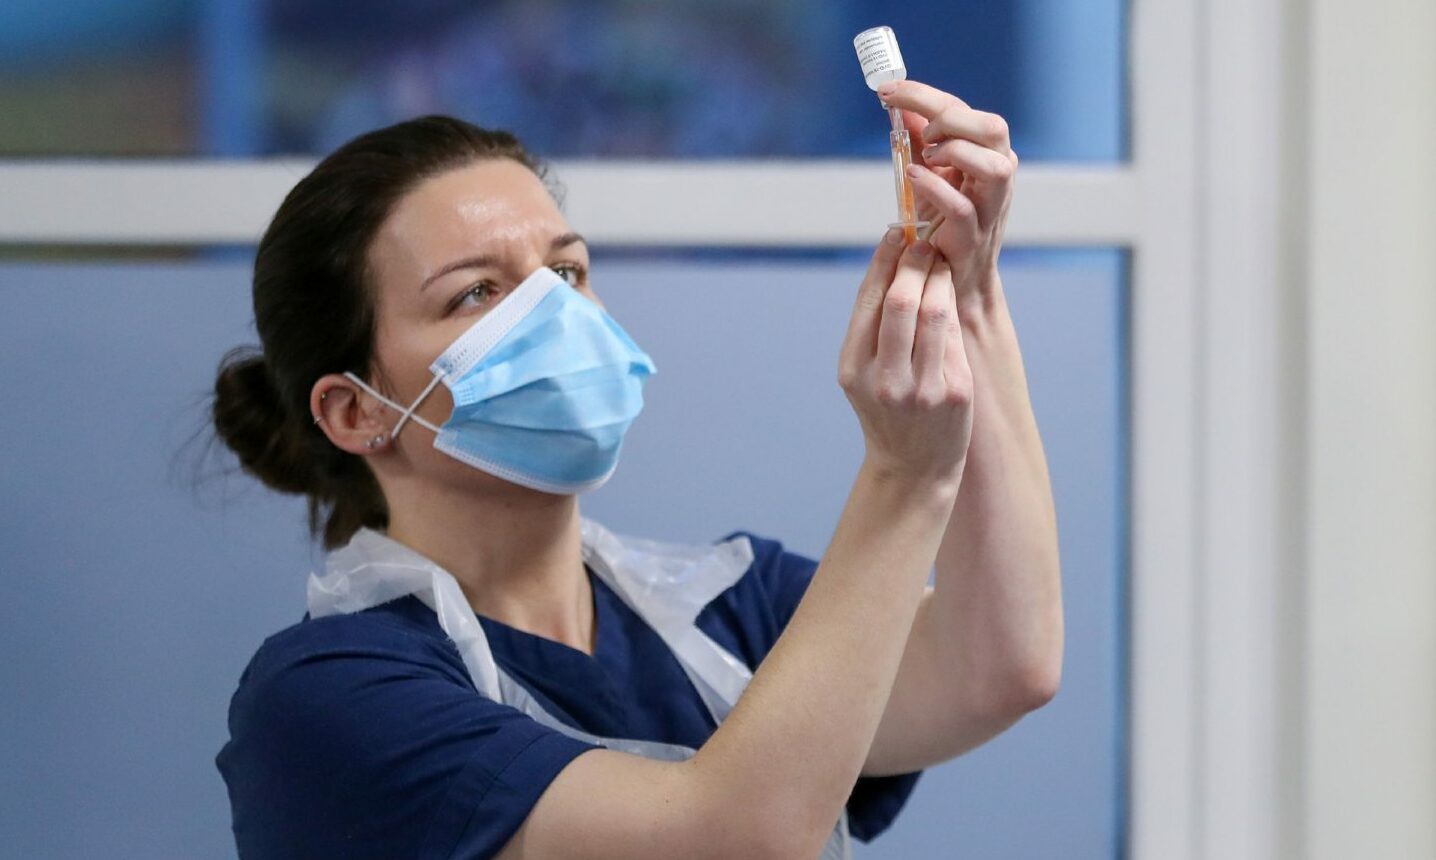 A healthcare worker fills a syringe with a dose of the Oxford/AstraZeneca coronavirus vaccine in January 2021.